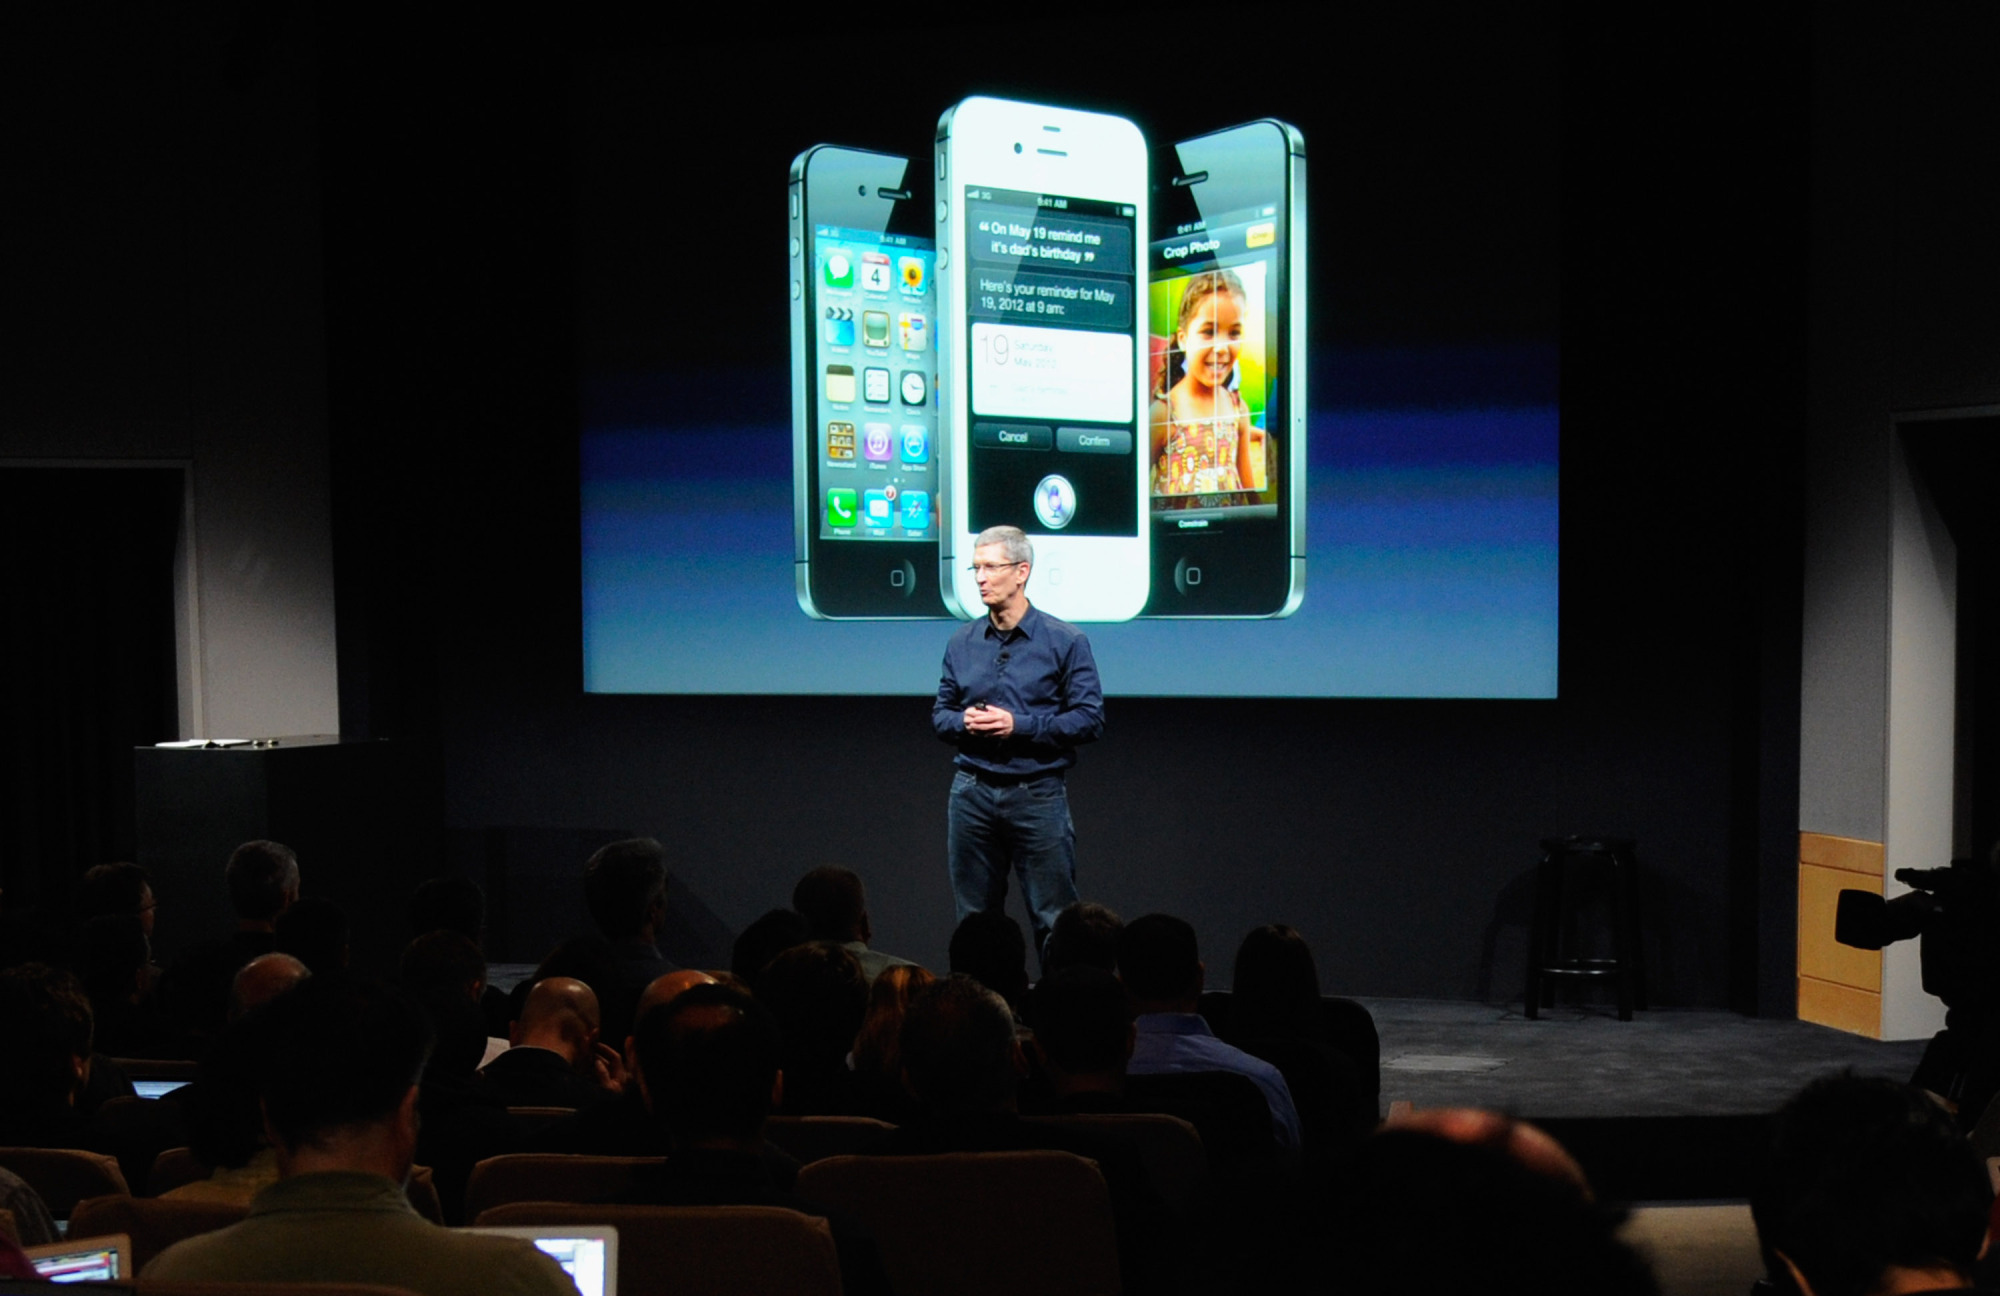 Image of Tim Cook introducing the iPhone 4S